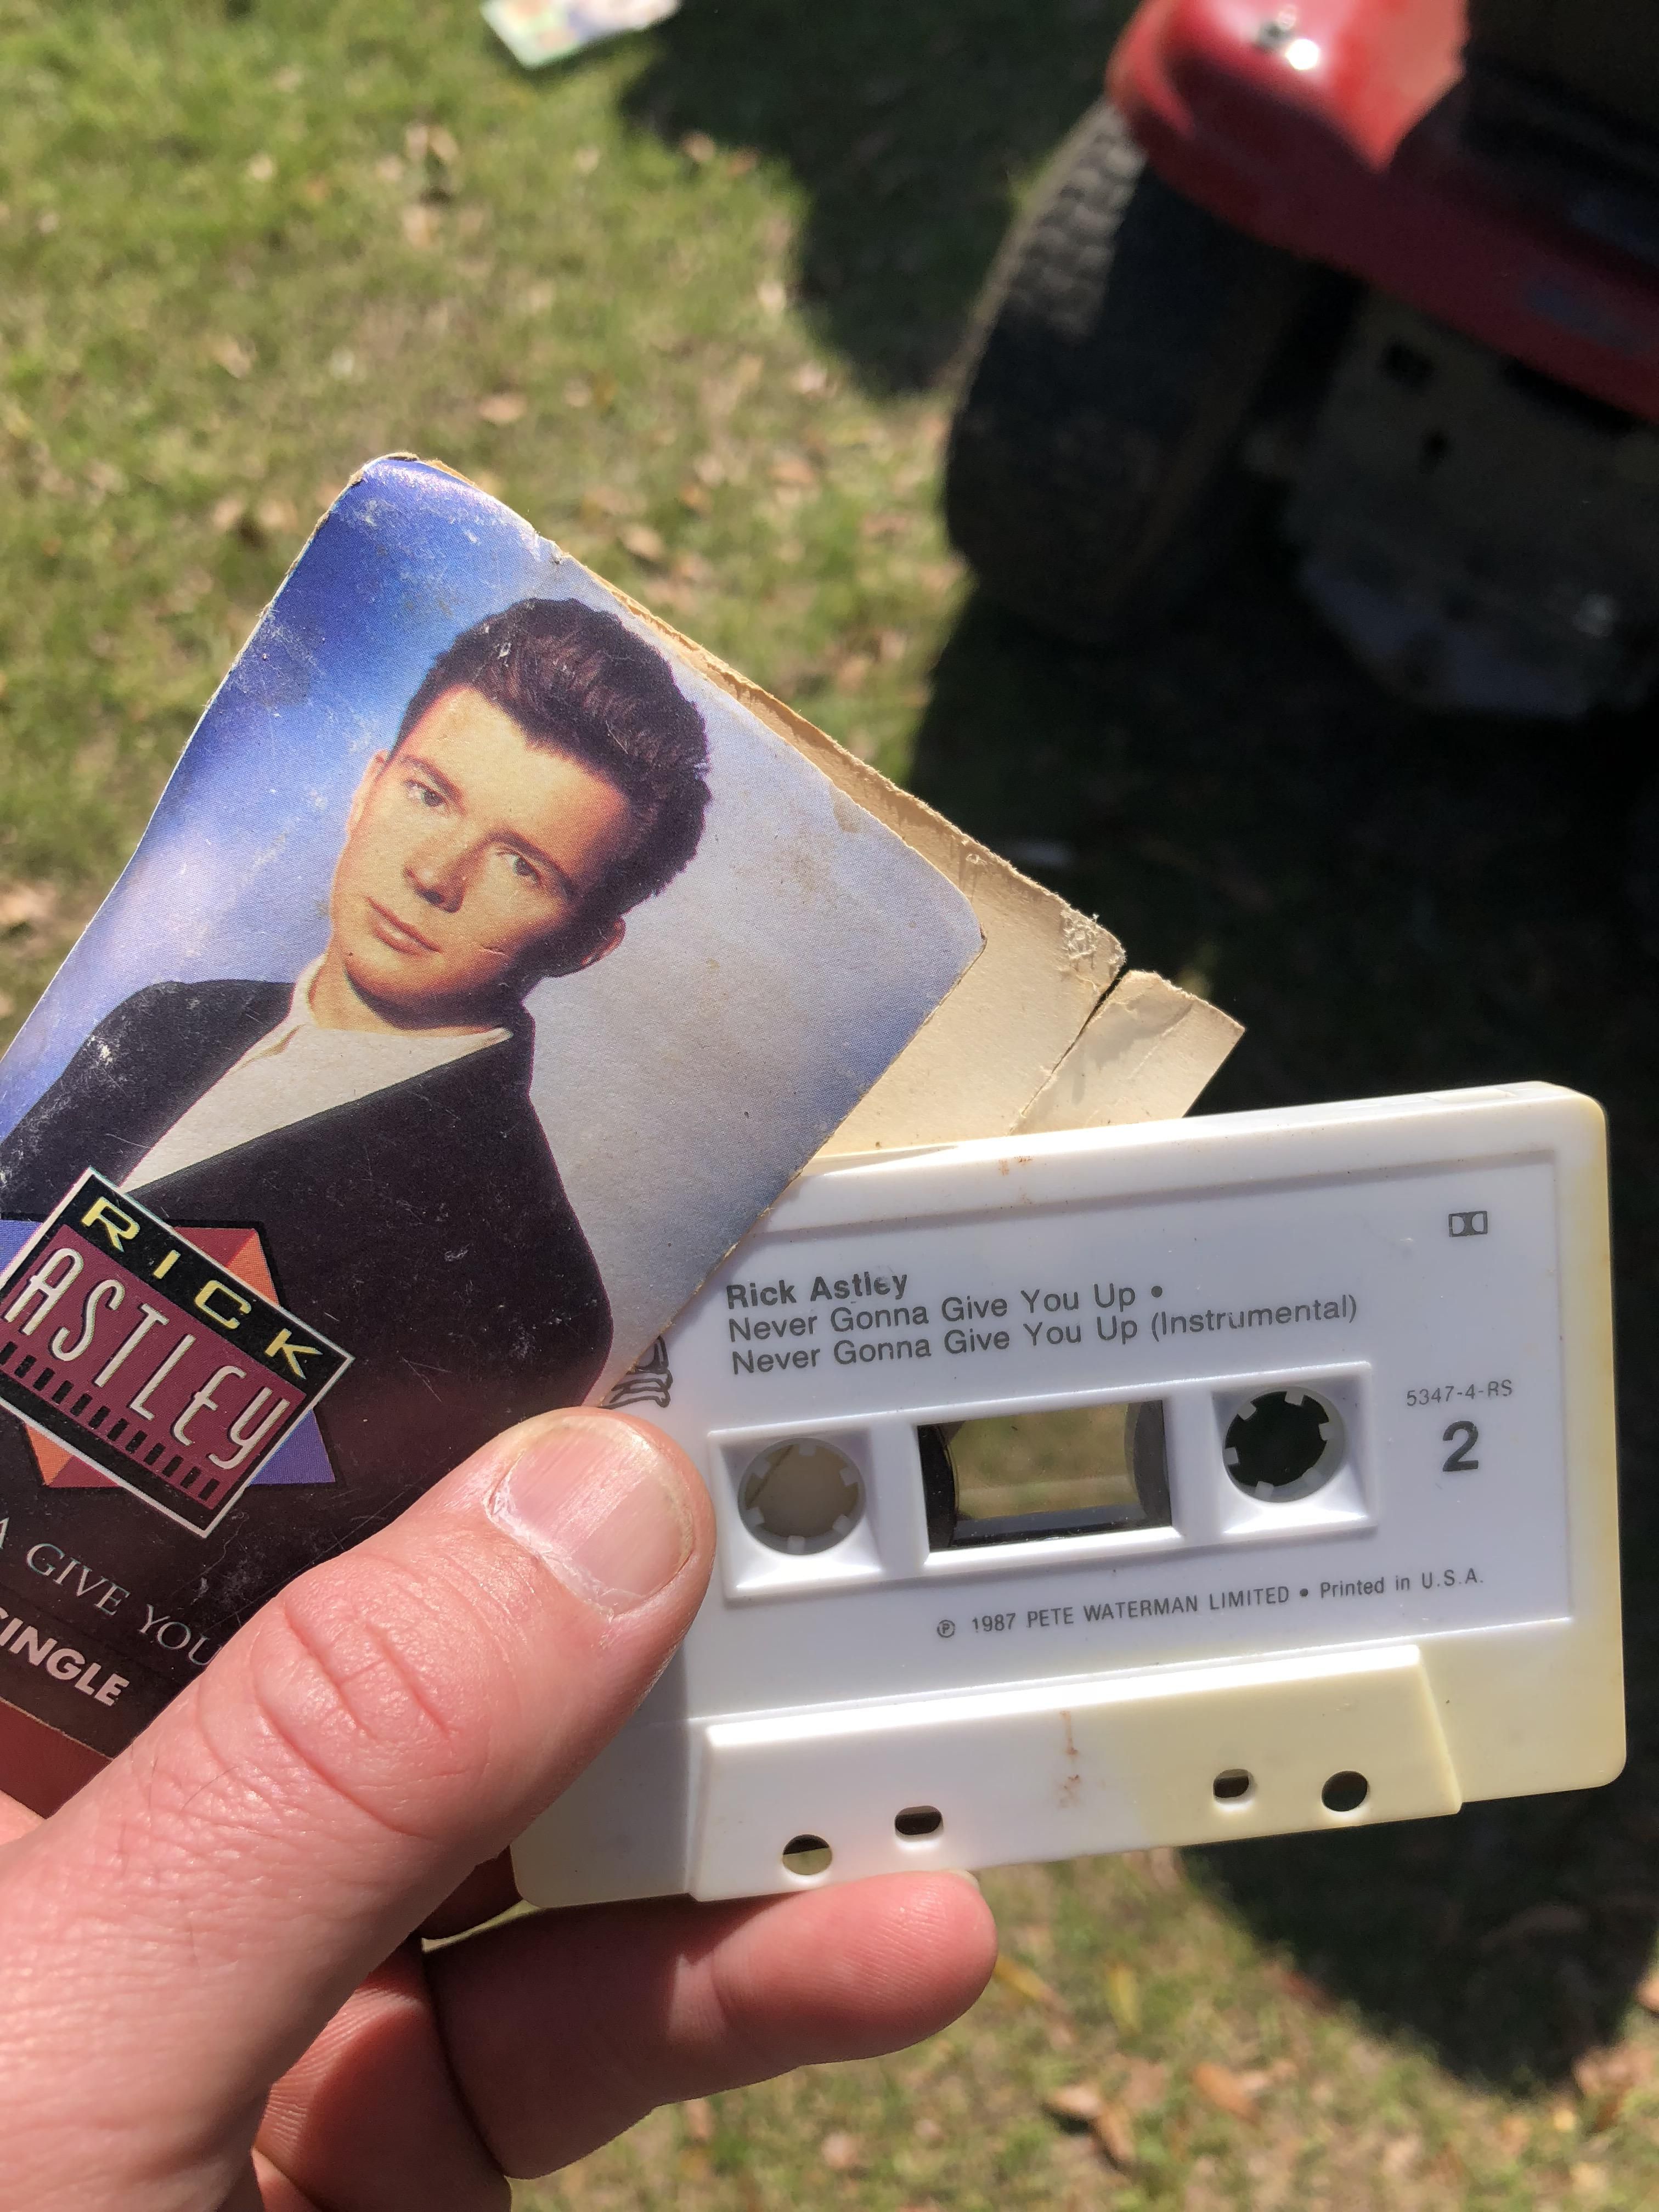 Helping a friend get cleaned up for a yard sale and found this